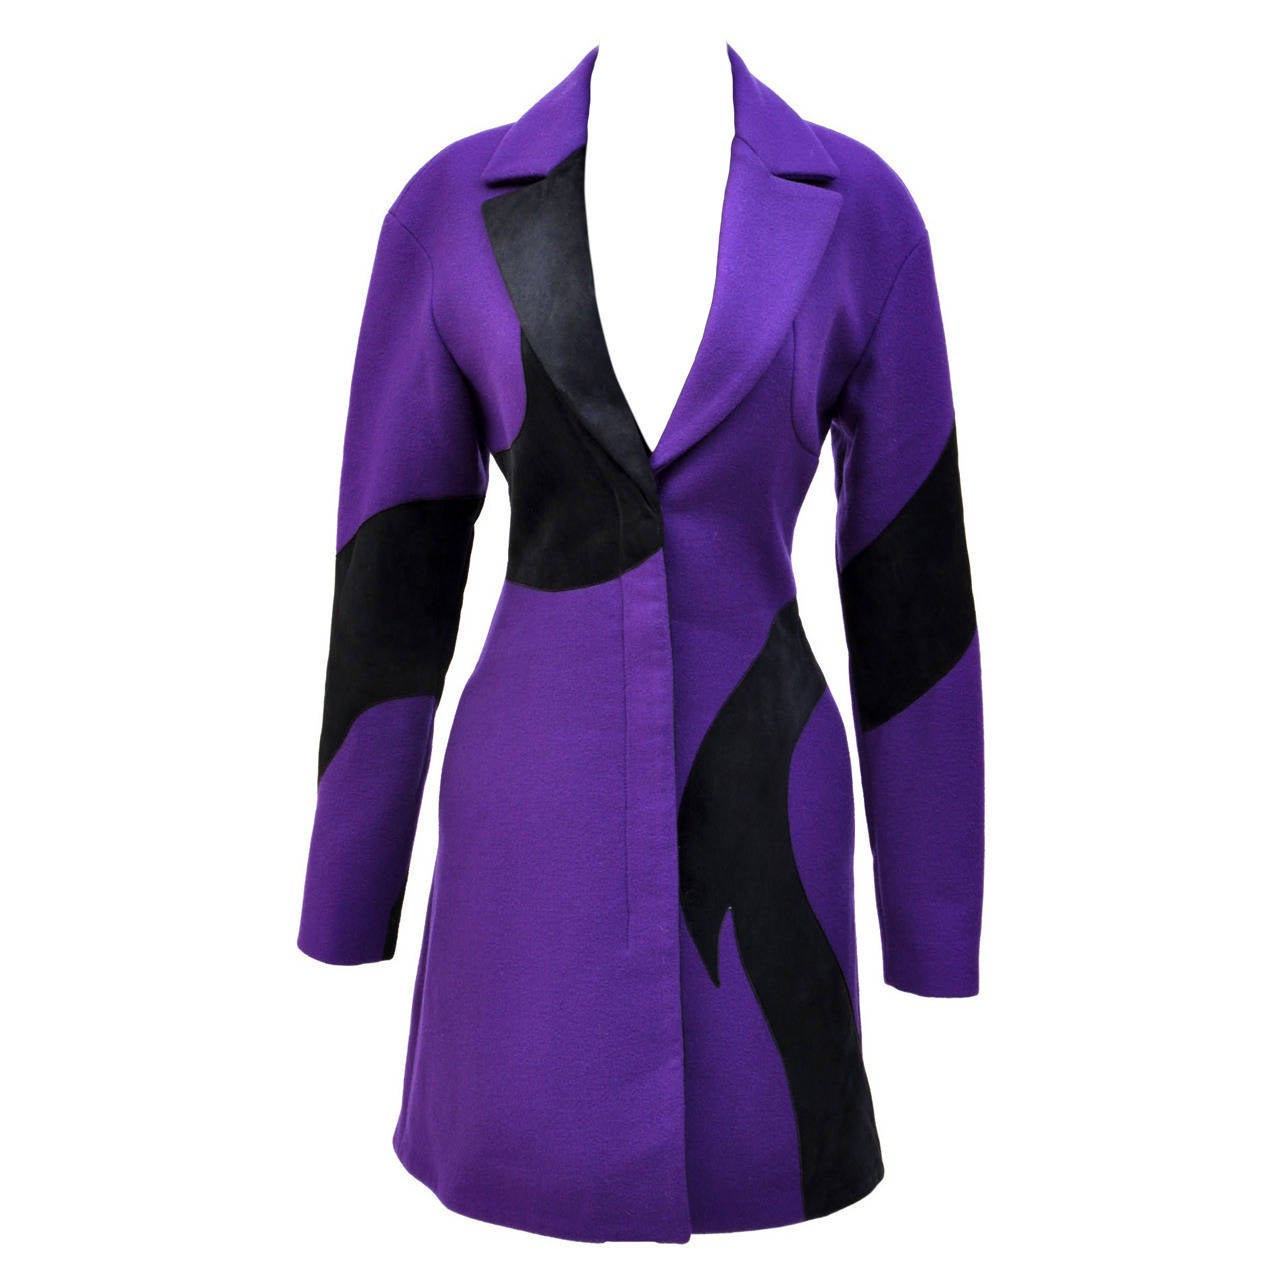 F/W 2011 look #20 NEW VERSACE VIOLET WOOL COAT with SUEDE 38 - 4 For Sale